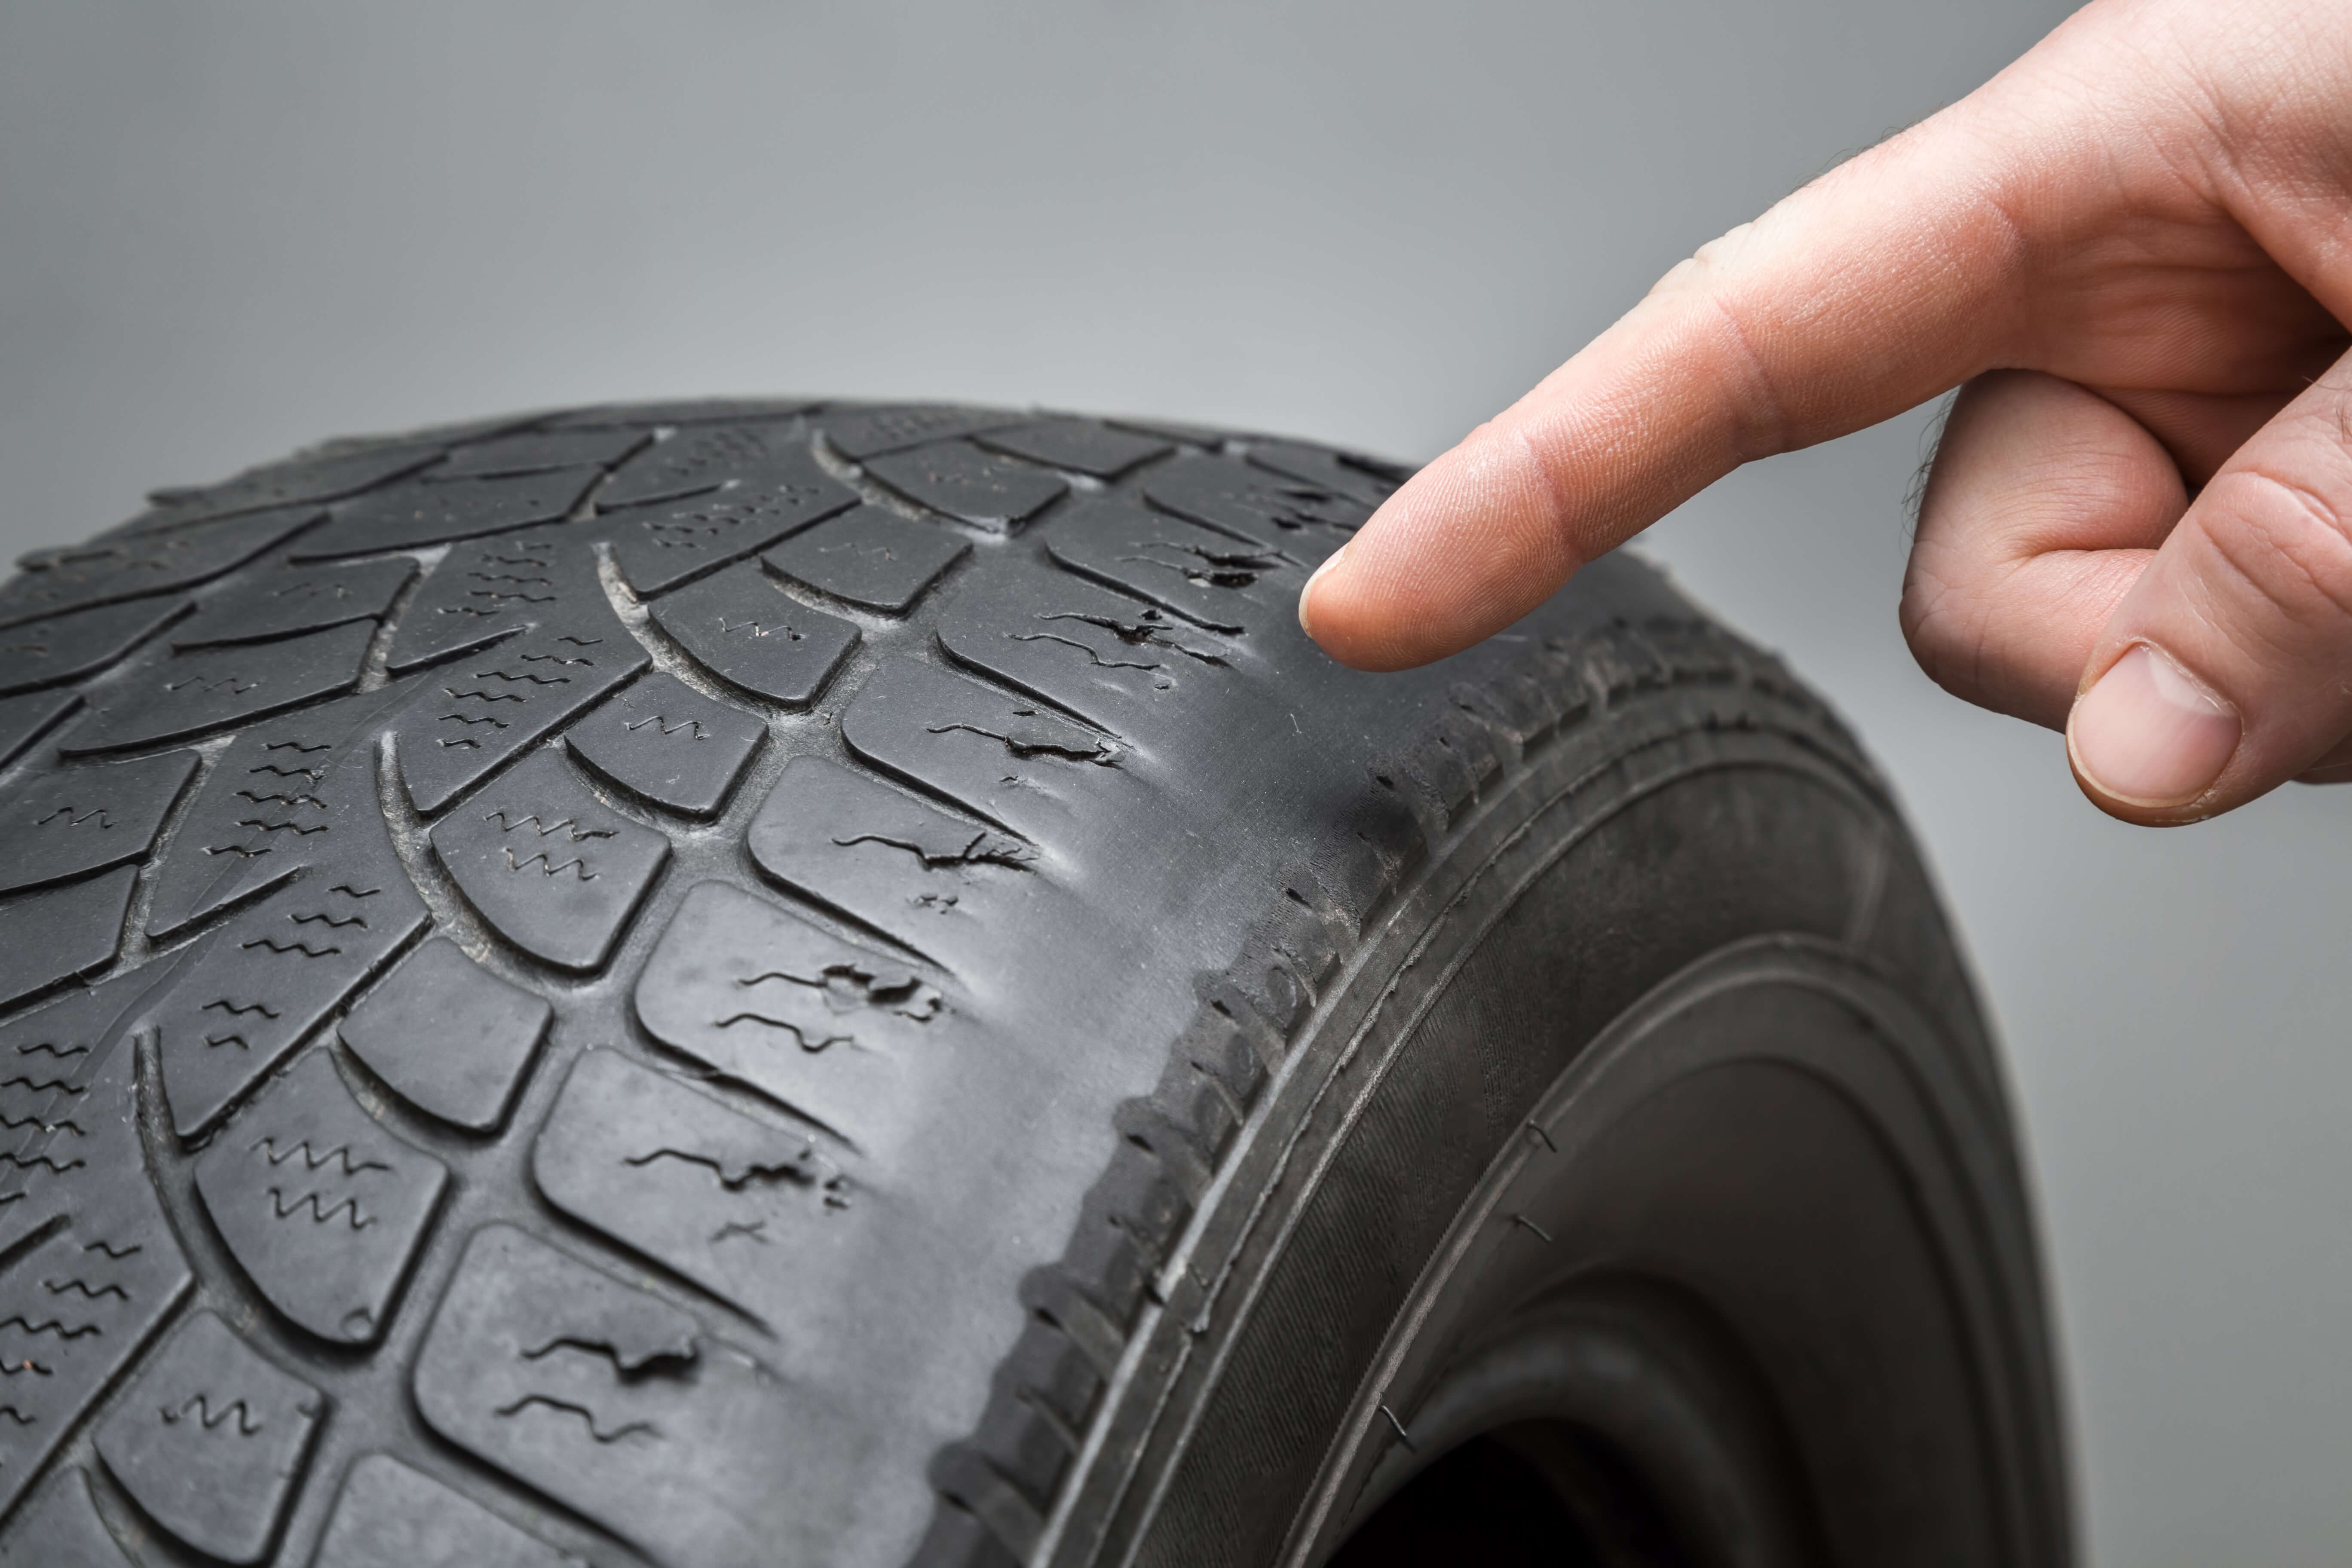 What Do the Different Types of Tire Wear Patterns Mean?